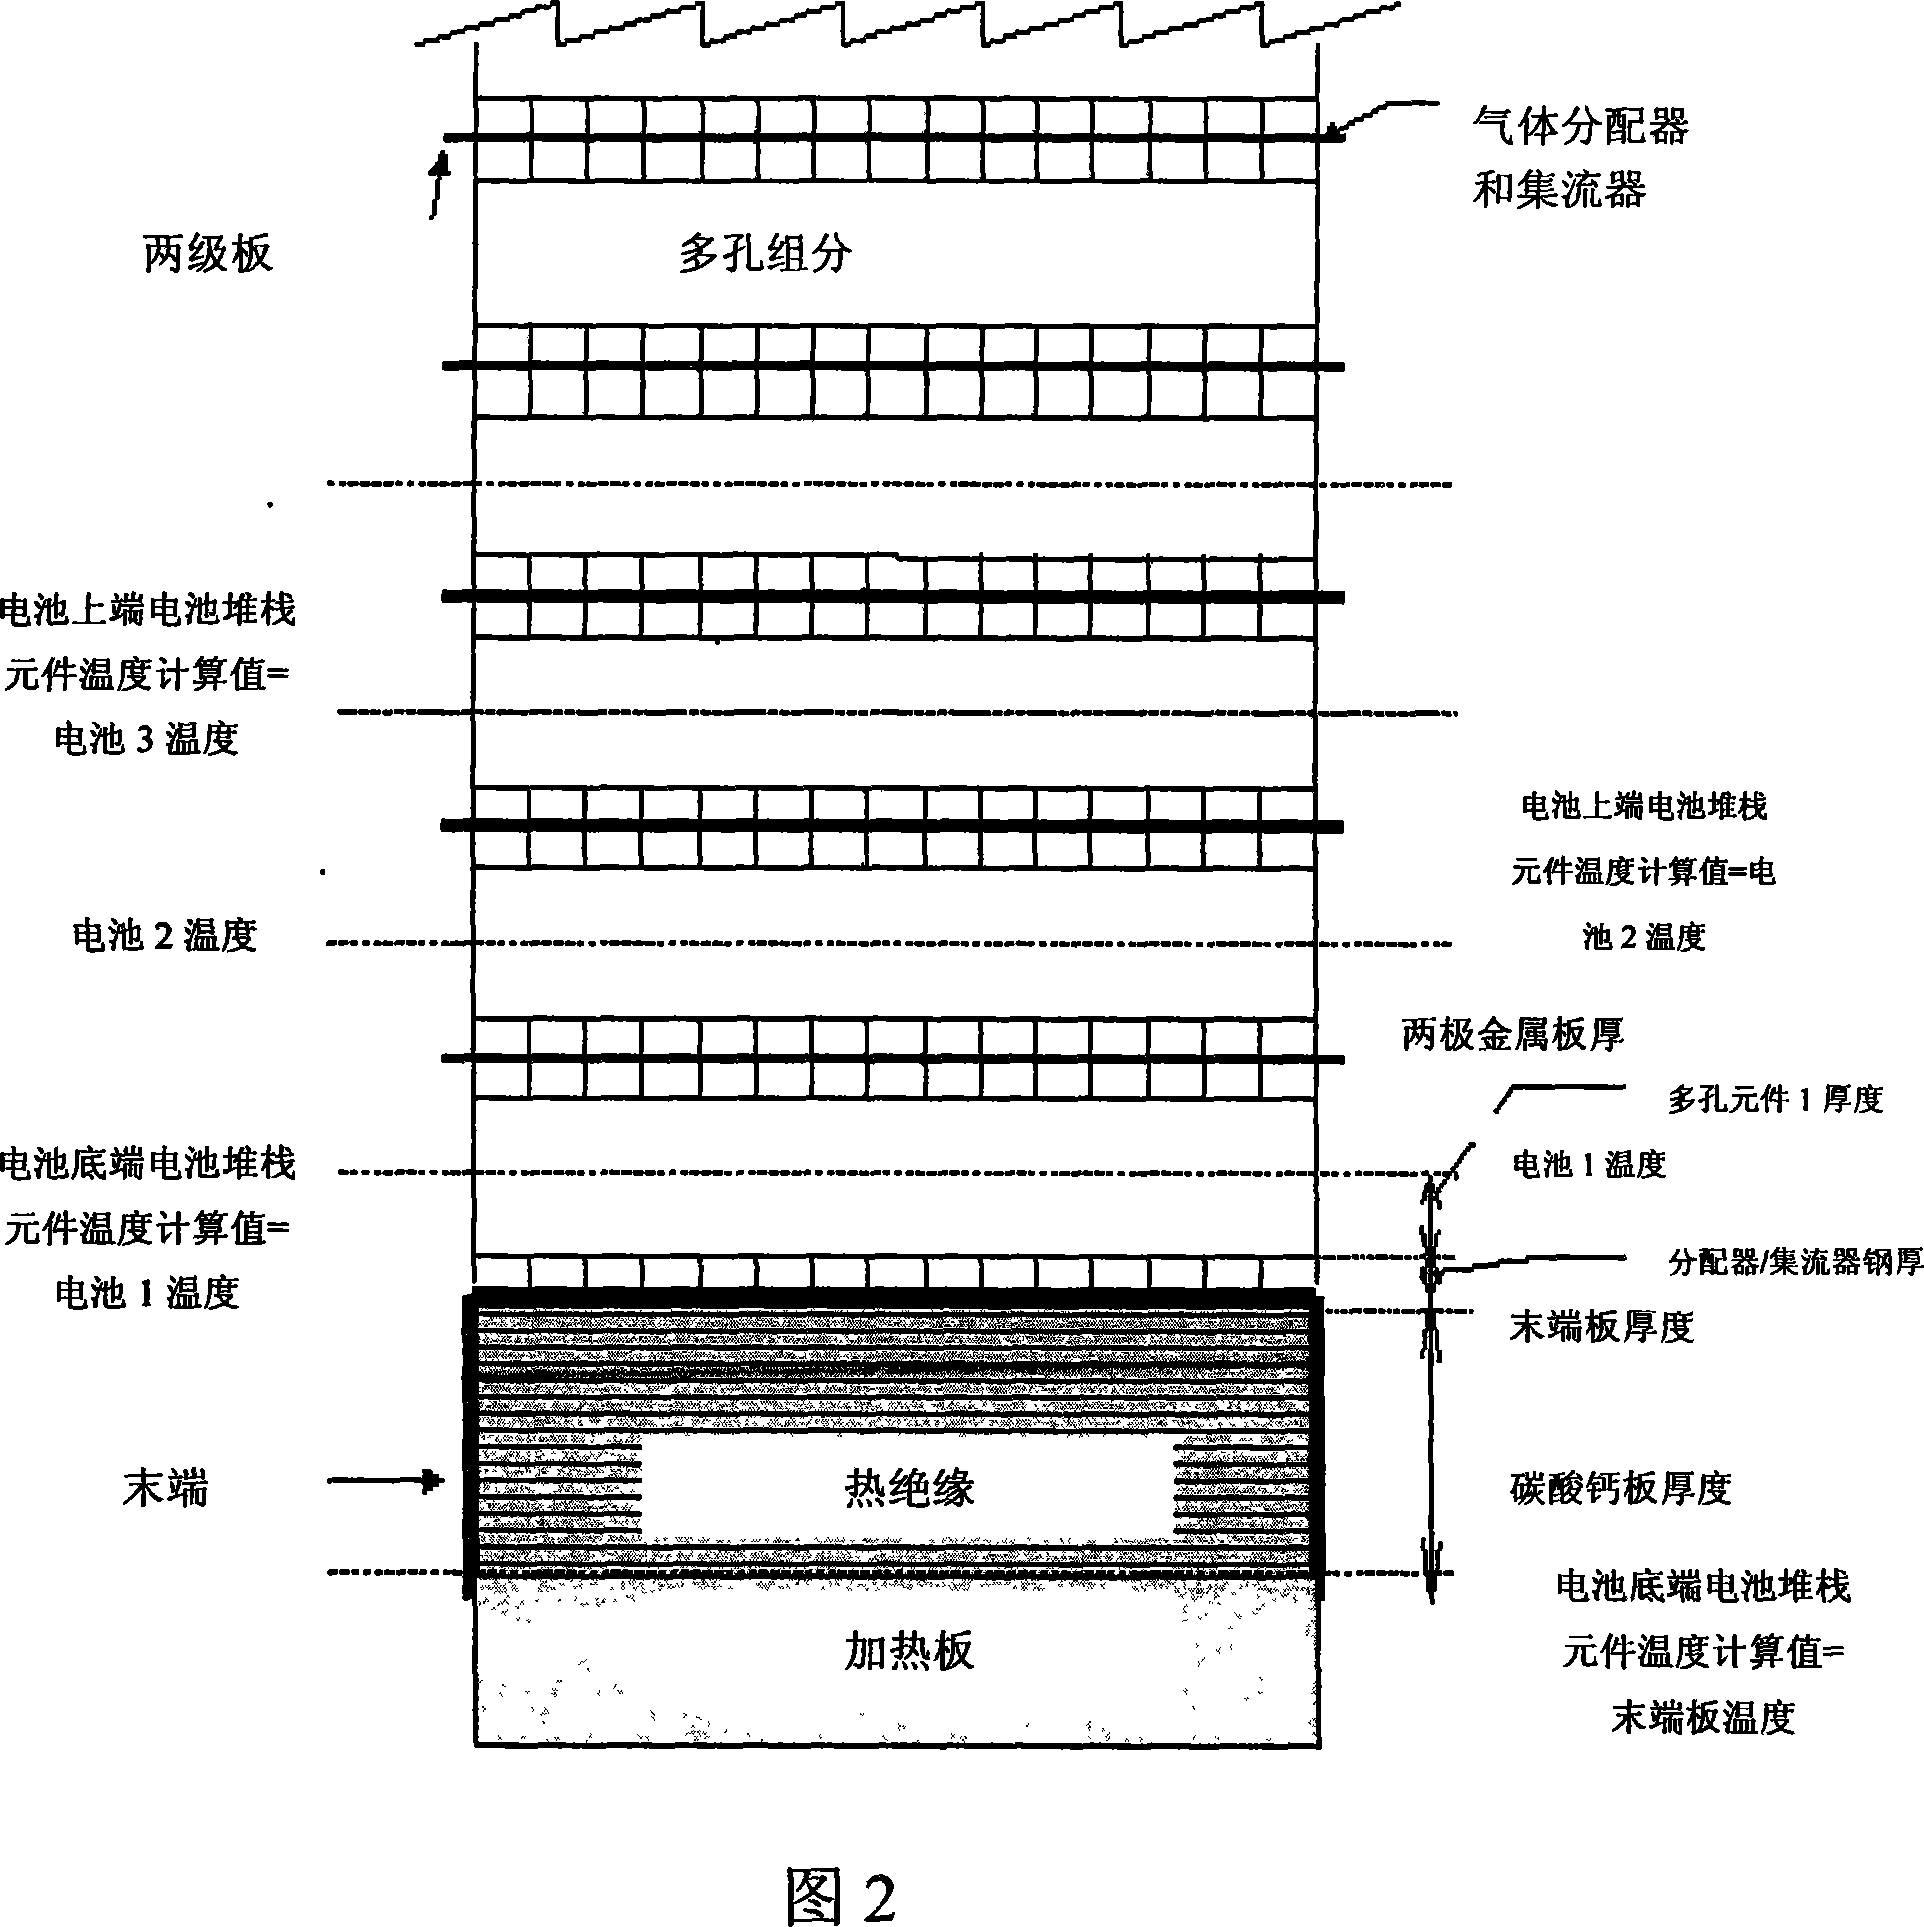 Method and system for operating molten carbonate fuel cells